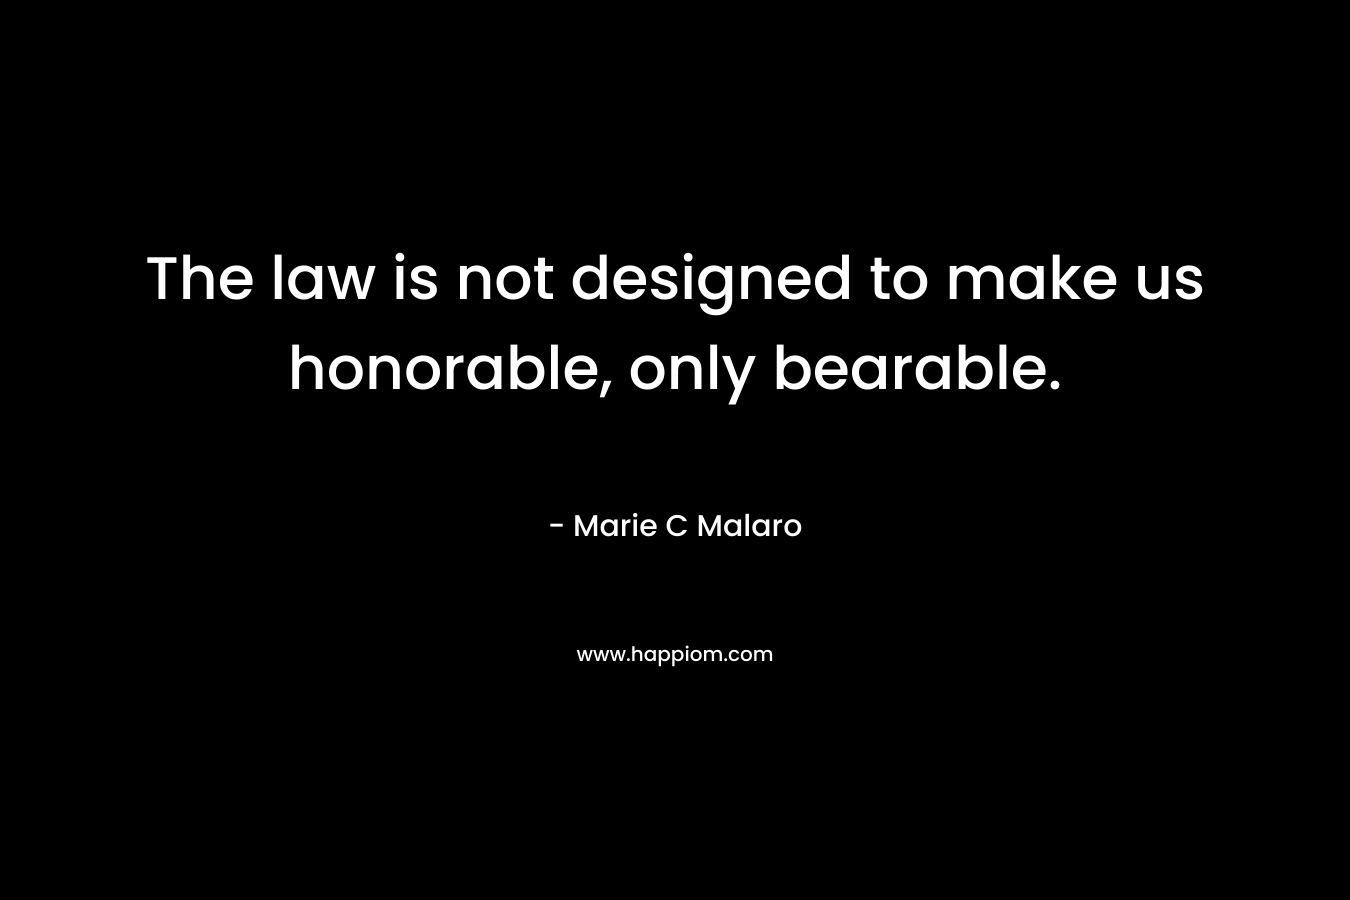 The law is not designed to make us honorable, only bearable.